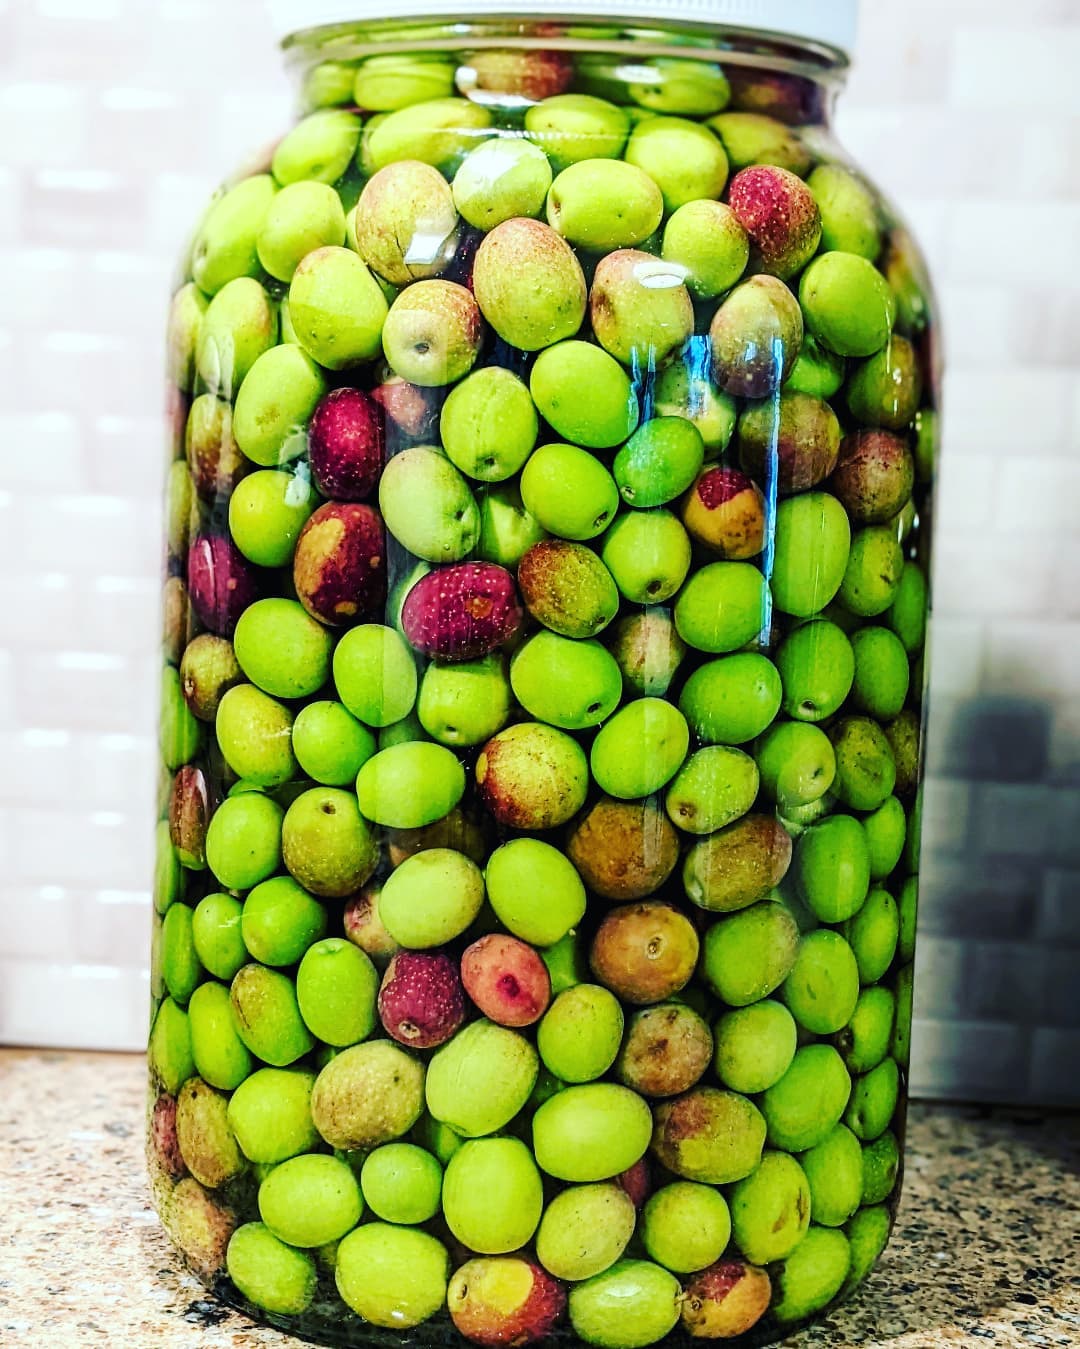 🫒Just managed to nab these 5 lbs of beautiful raw California olives at the tail end of the season. Let's revisit this one with lots of details in about 6 months, in advance of the next harvest!